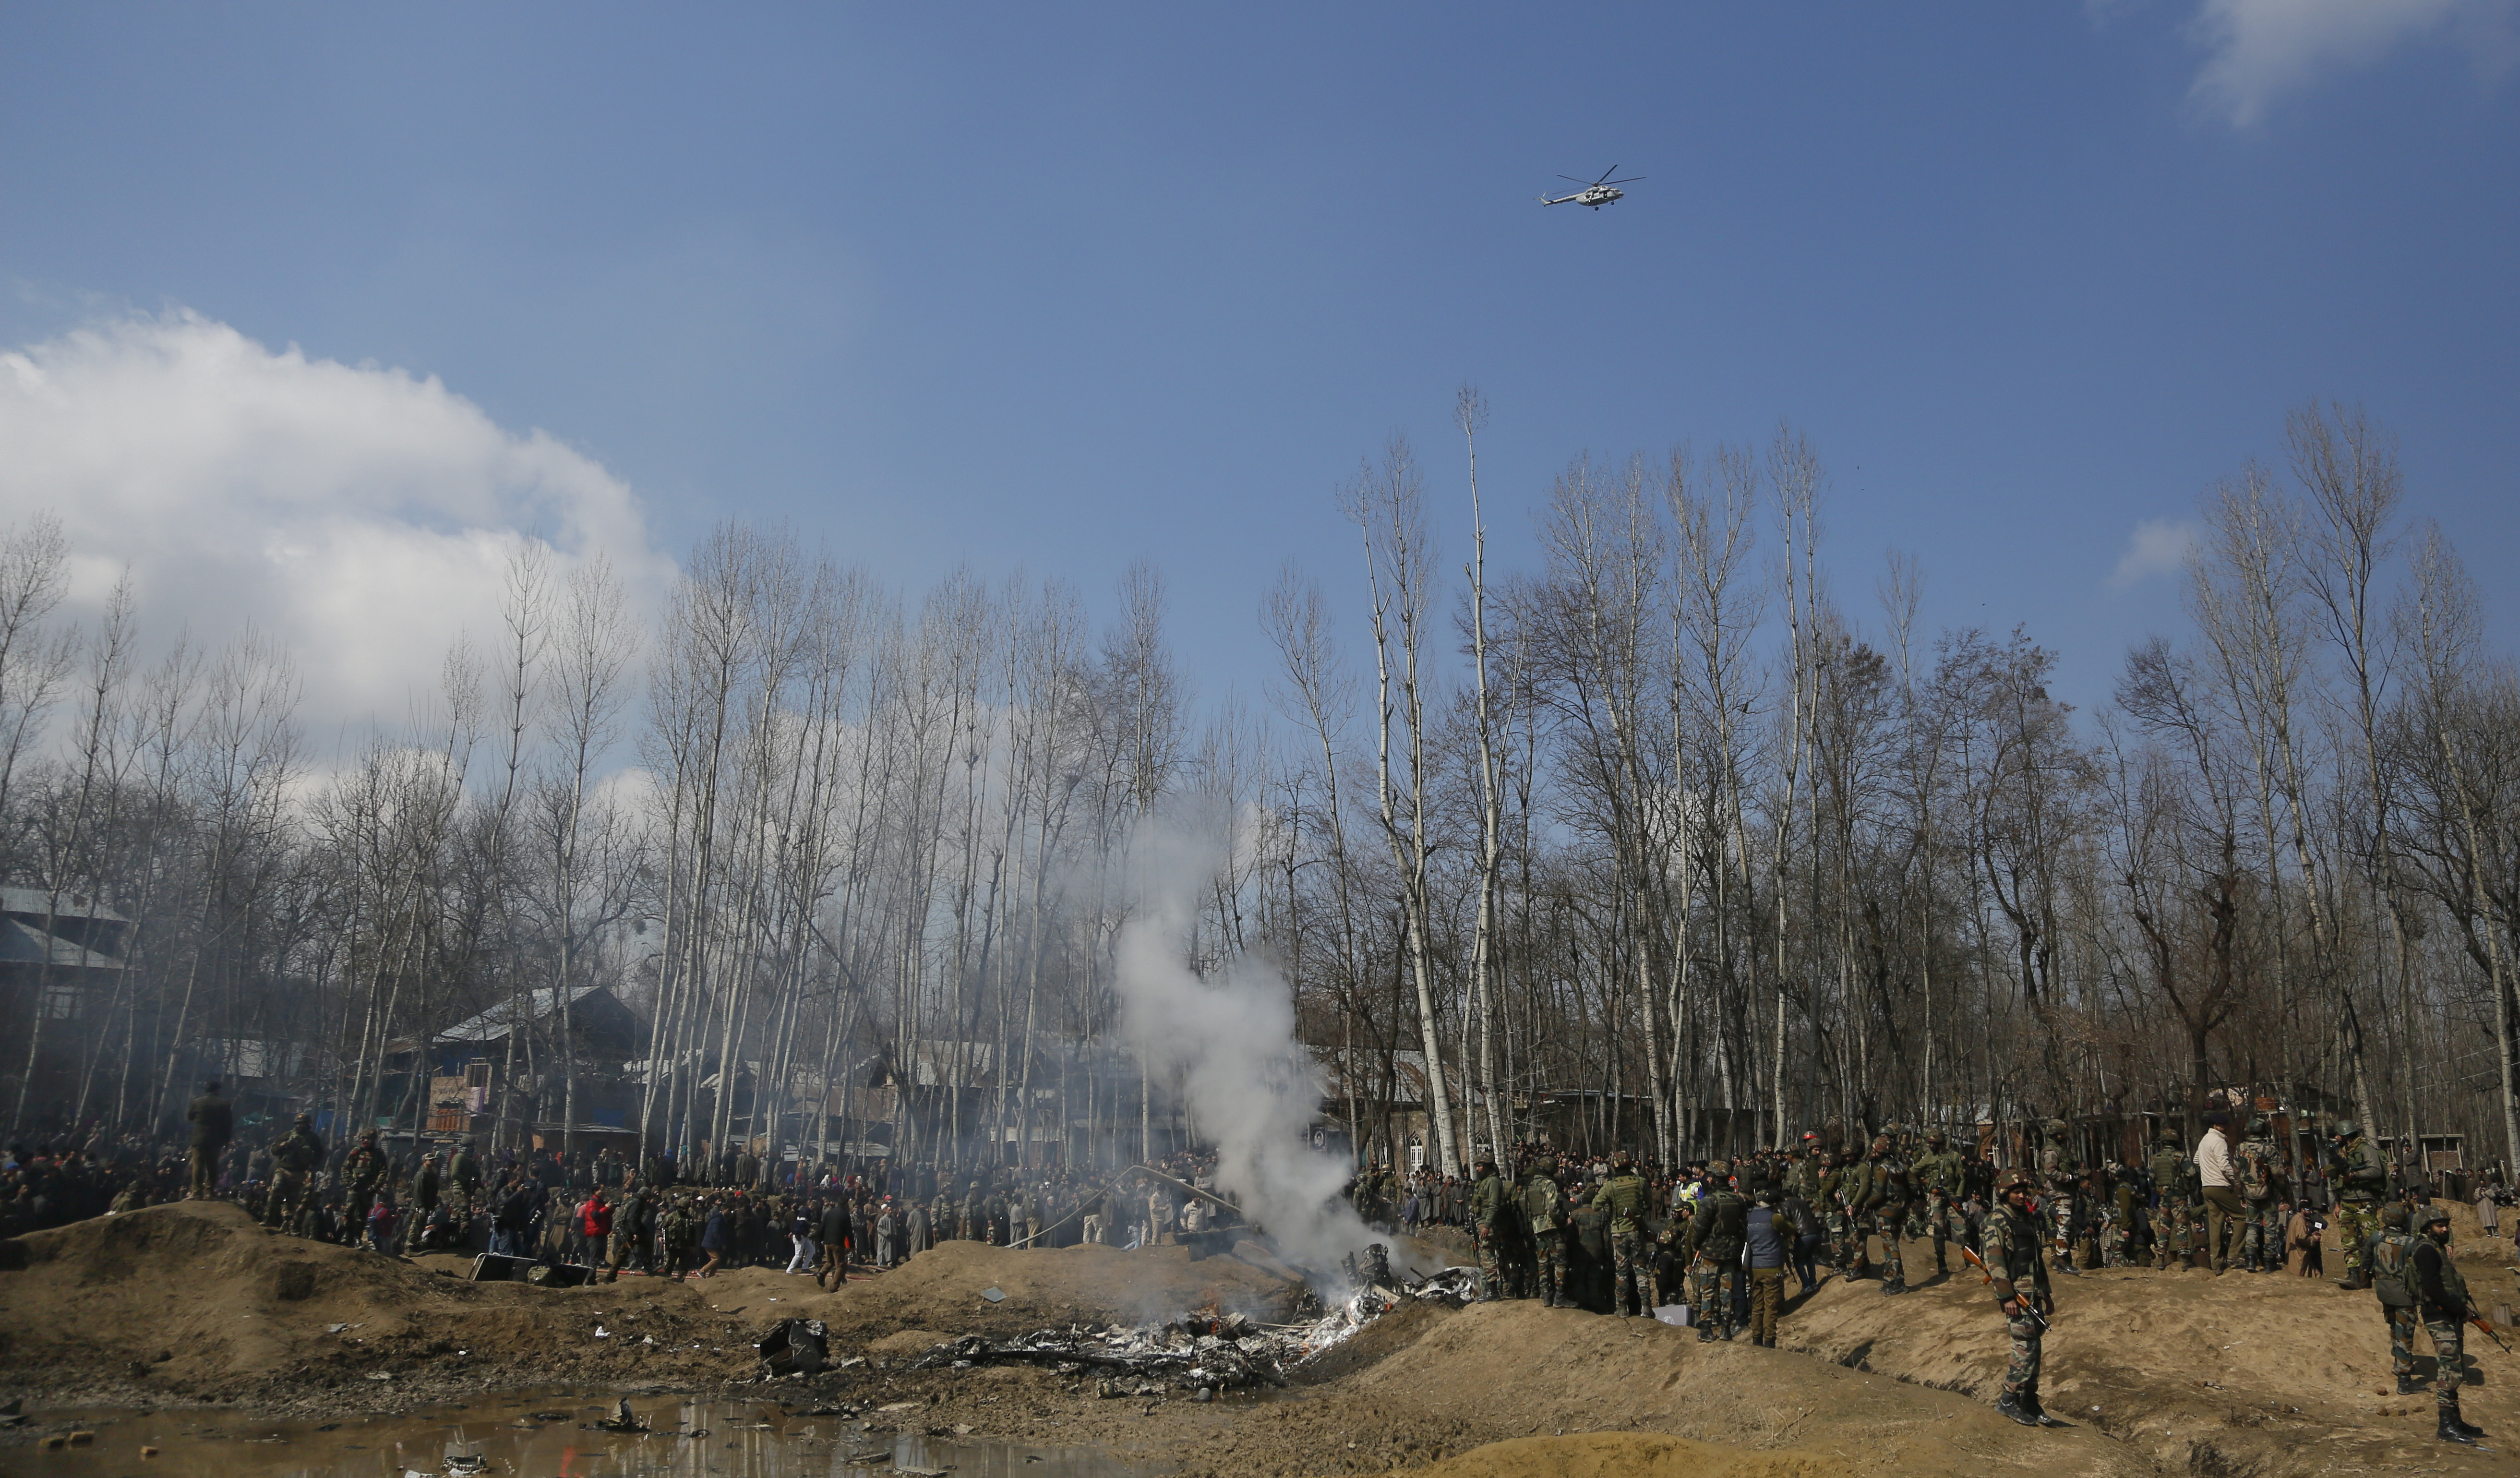 Kashmiri villagers and Indian soldiers gather near the wreckage of an Indian aircraft after it crashed in Budgam area, outskirts of Srinagar - AP